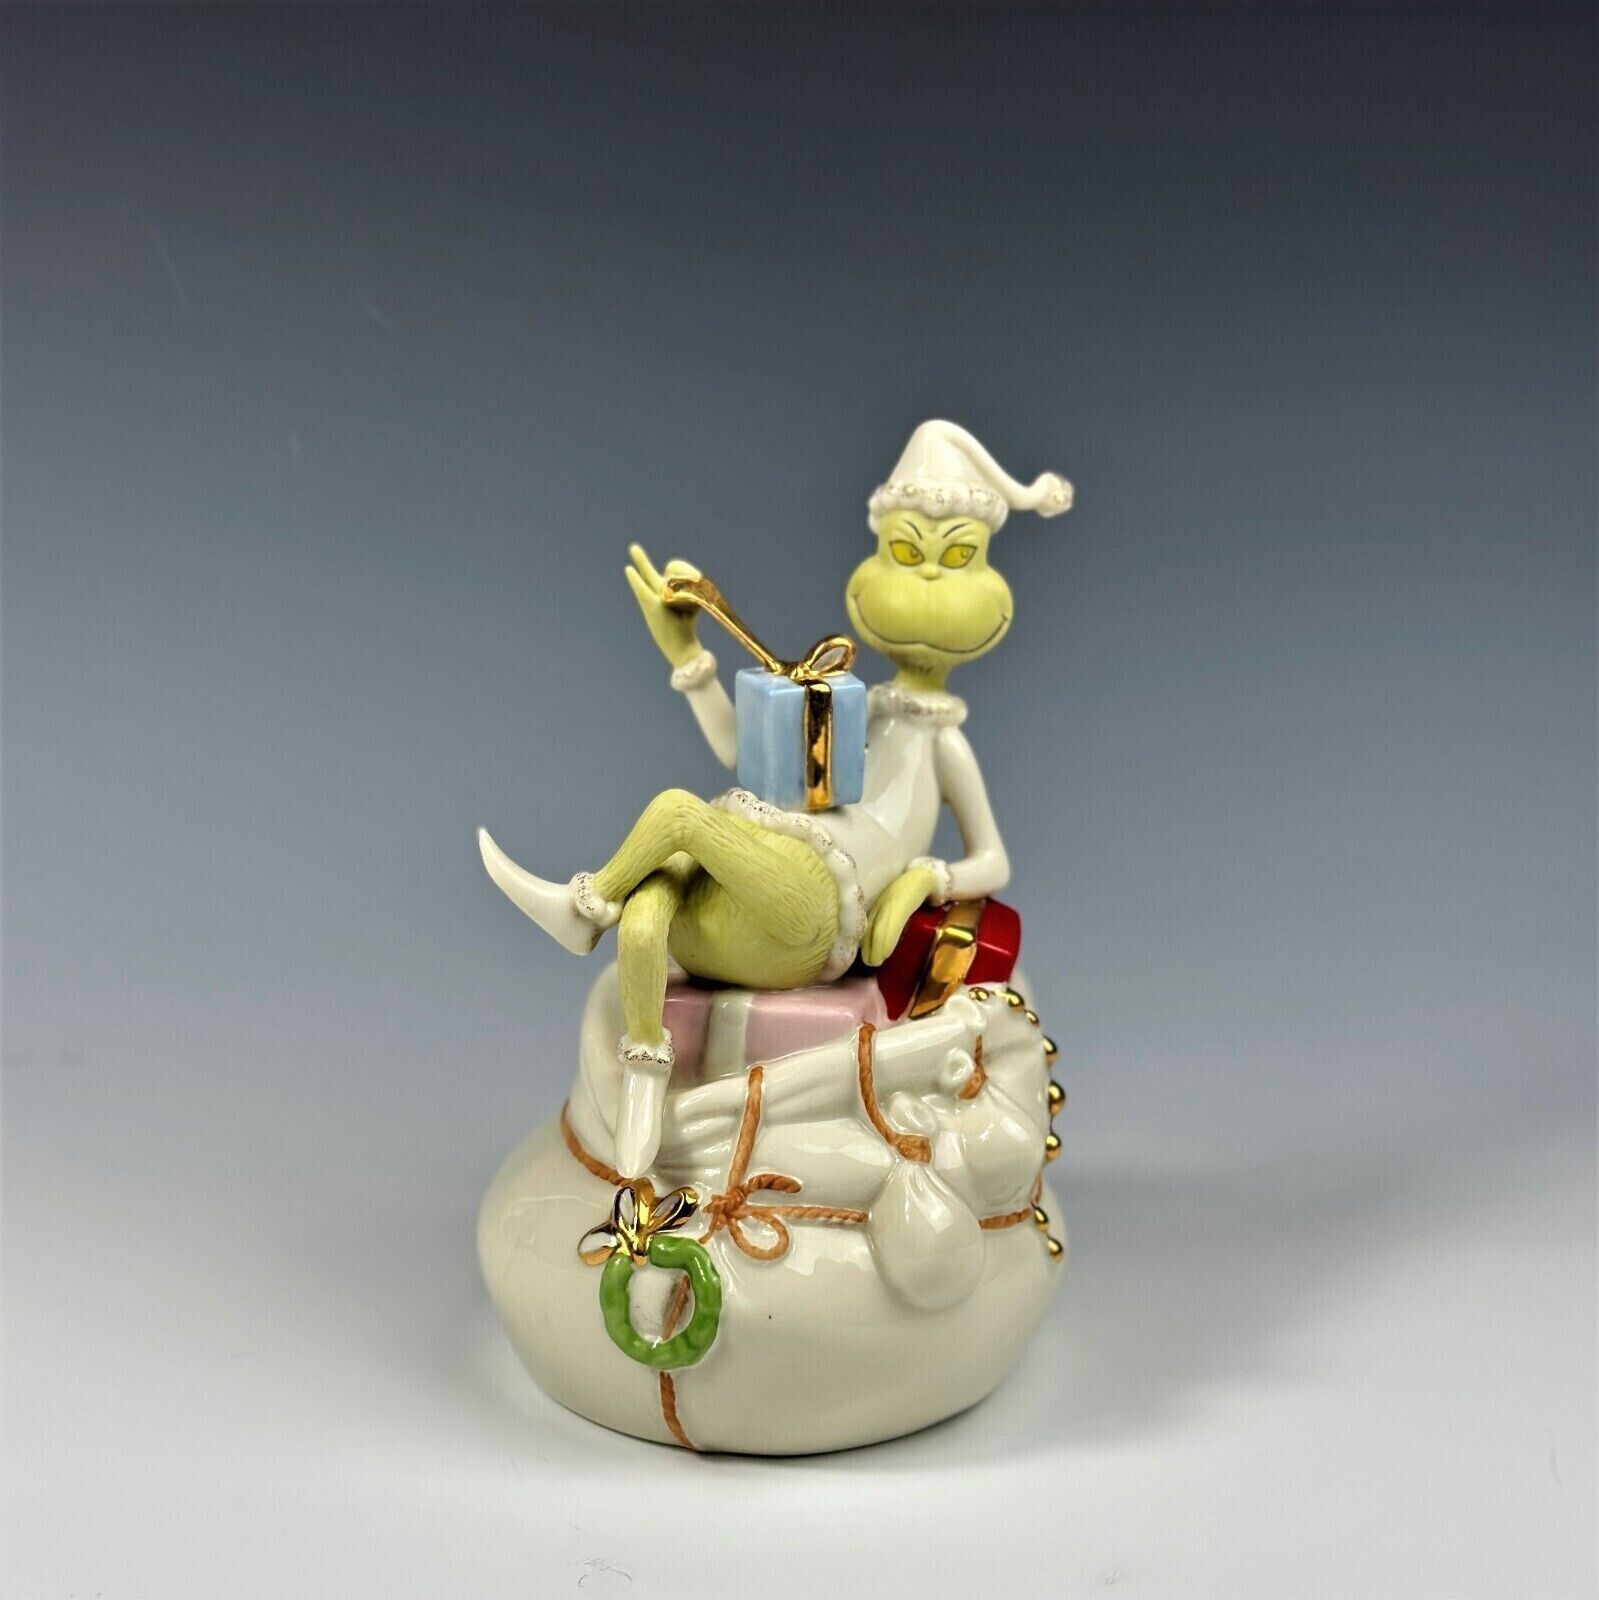 LENOX A Grinchy Moment In Whoville Figurine 2013 In Loose